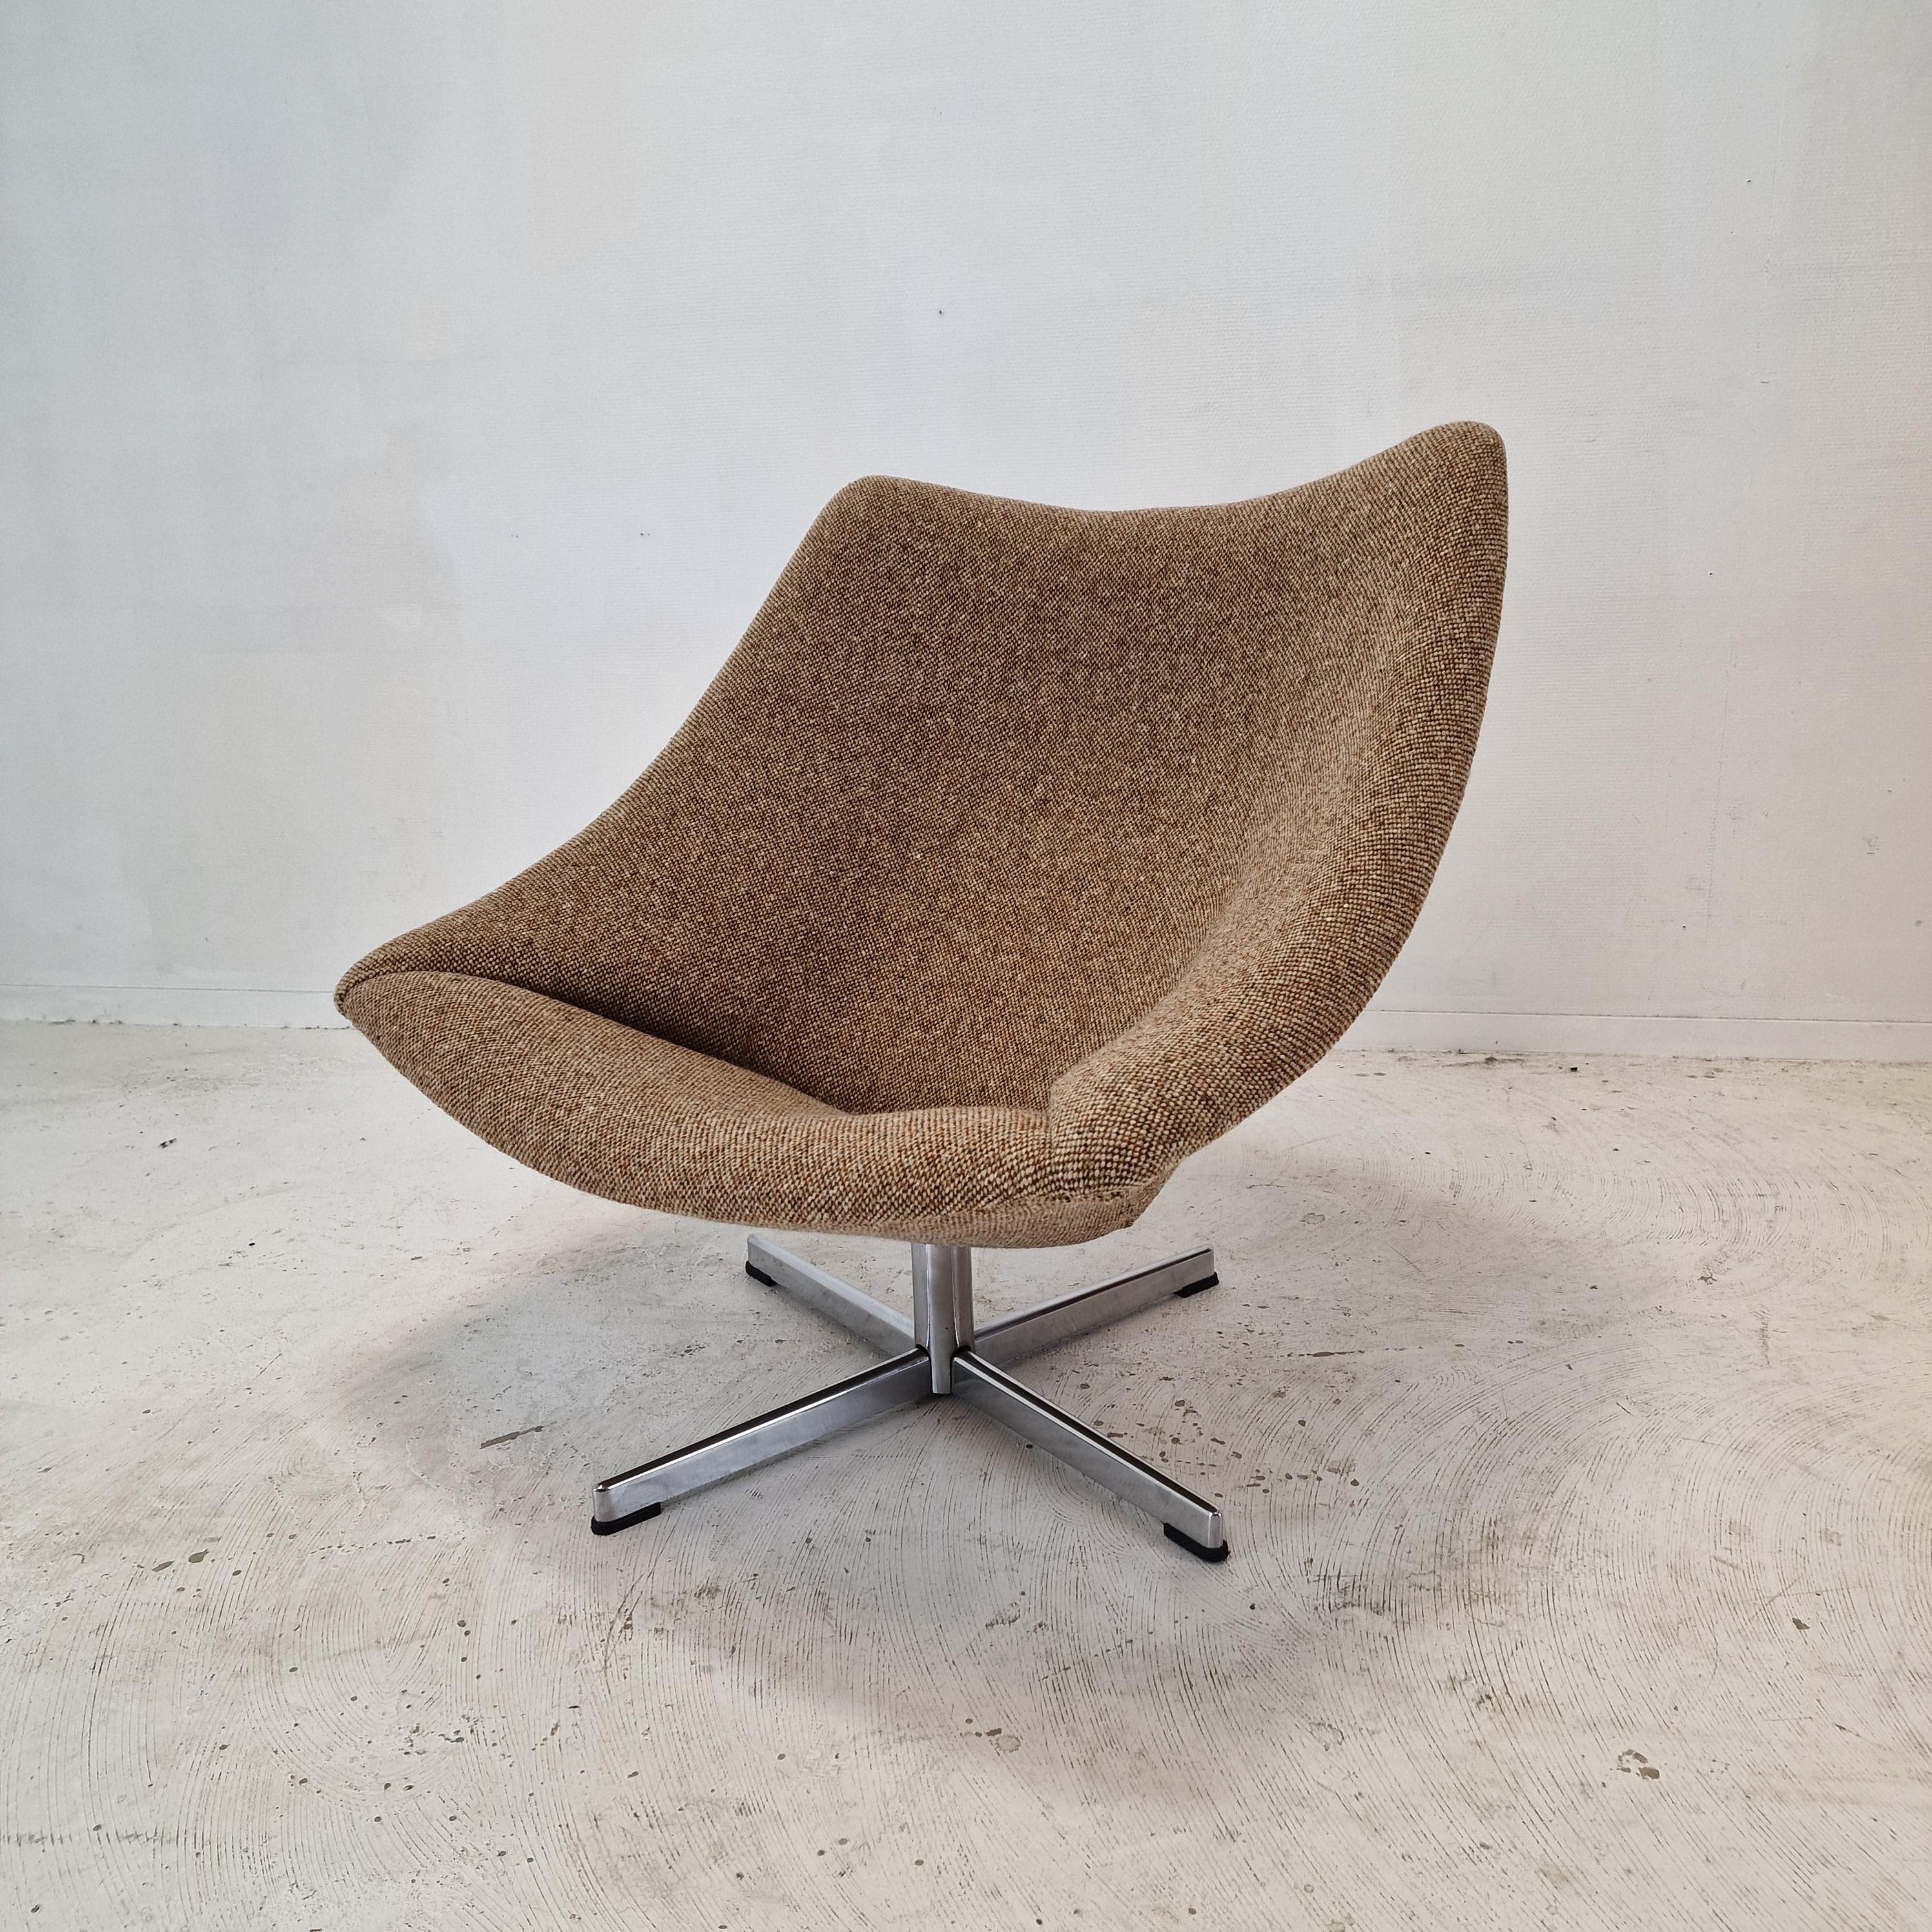 A beautiful and rare Artifort Oyster chair with cross base.

This very comfortable and pivoting chair is designed by Pierre Paulin and fabricated by Artifort in the 60's.

It is just restored with new fabric and new foam, so it is in perfect